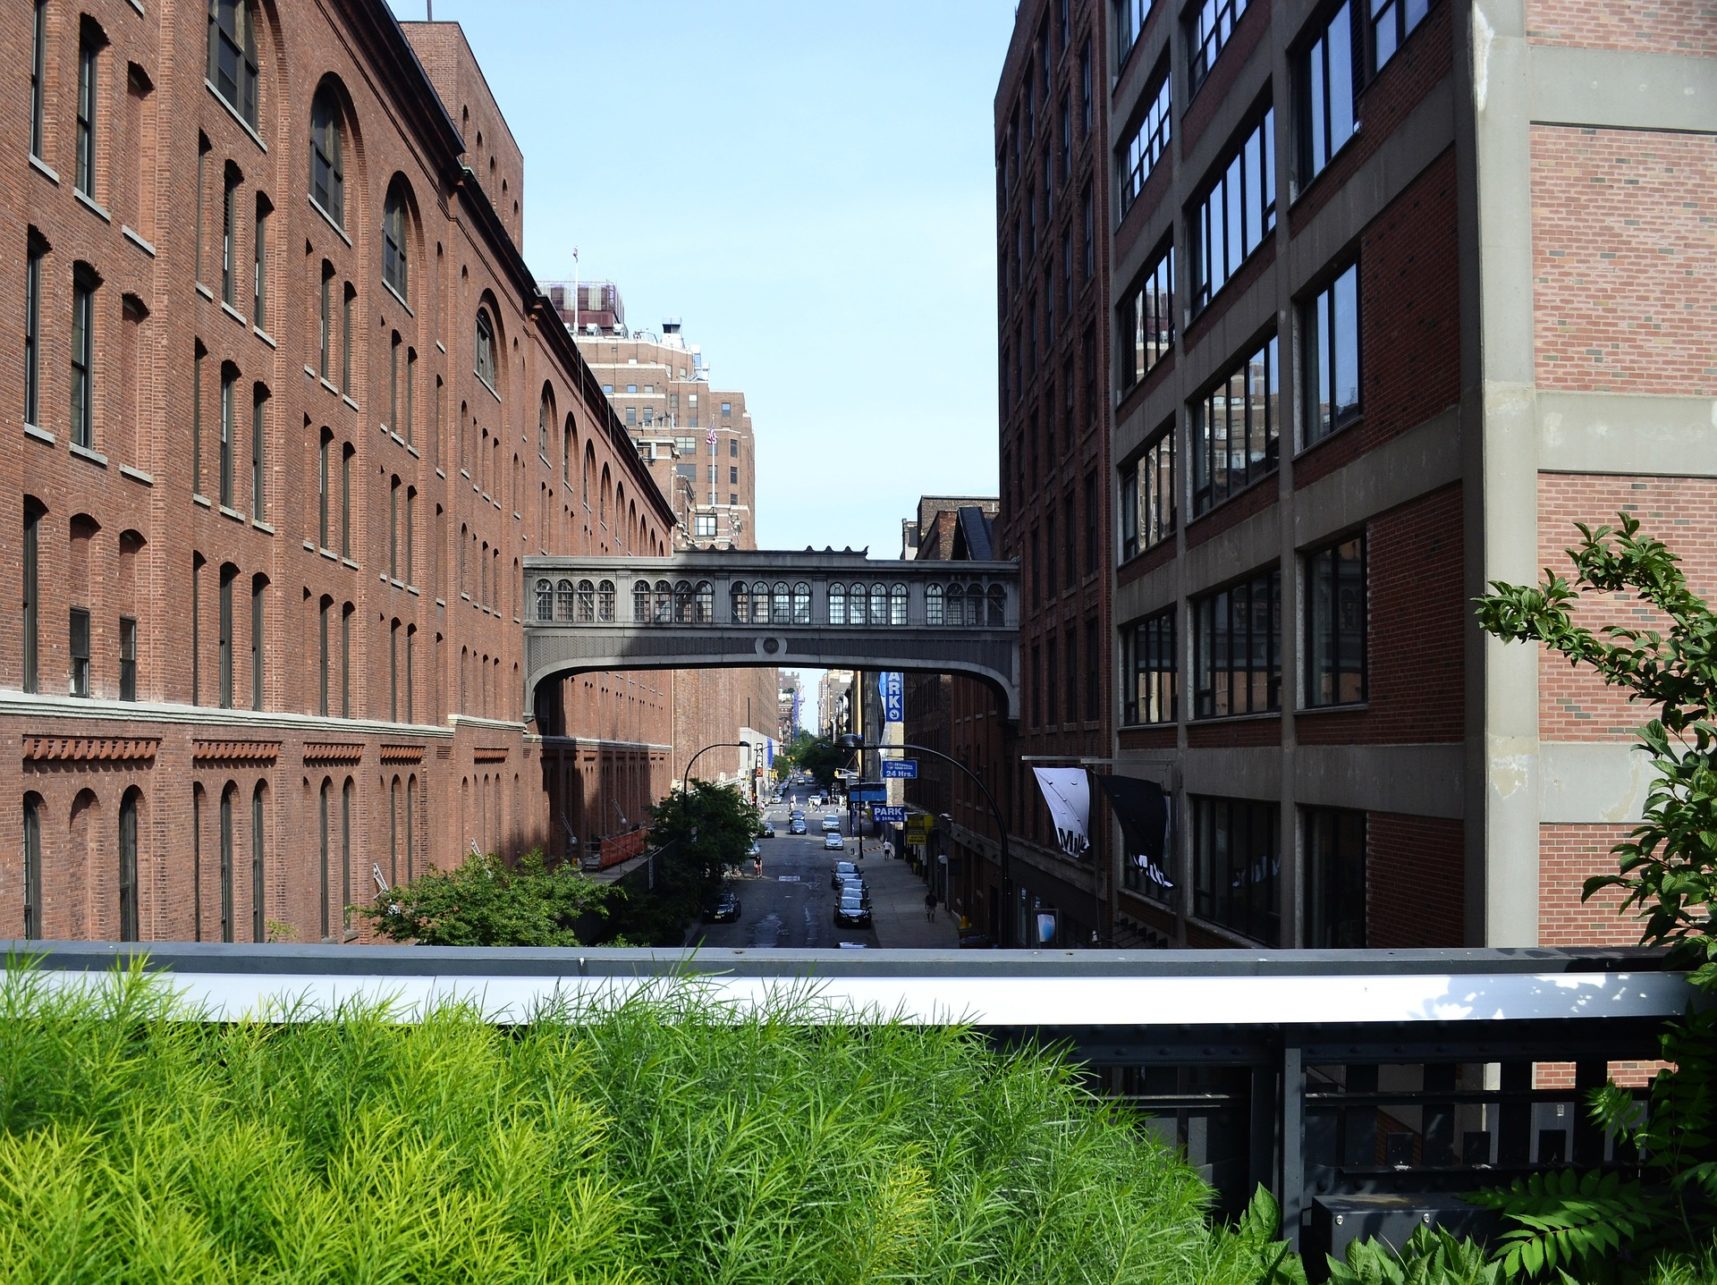 Die High Line in Chelsea in New York City, USA.